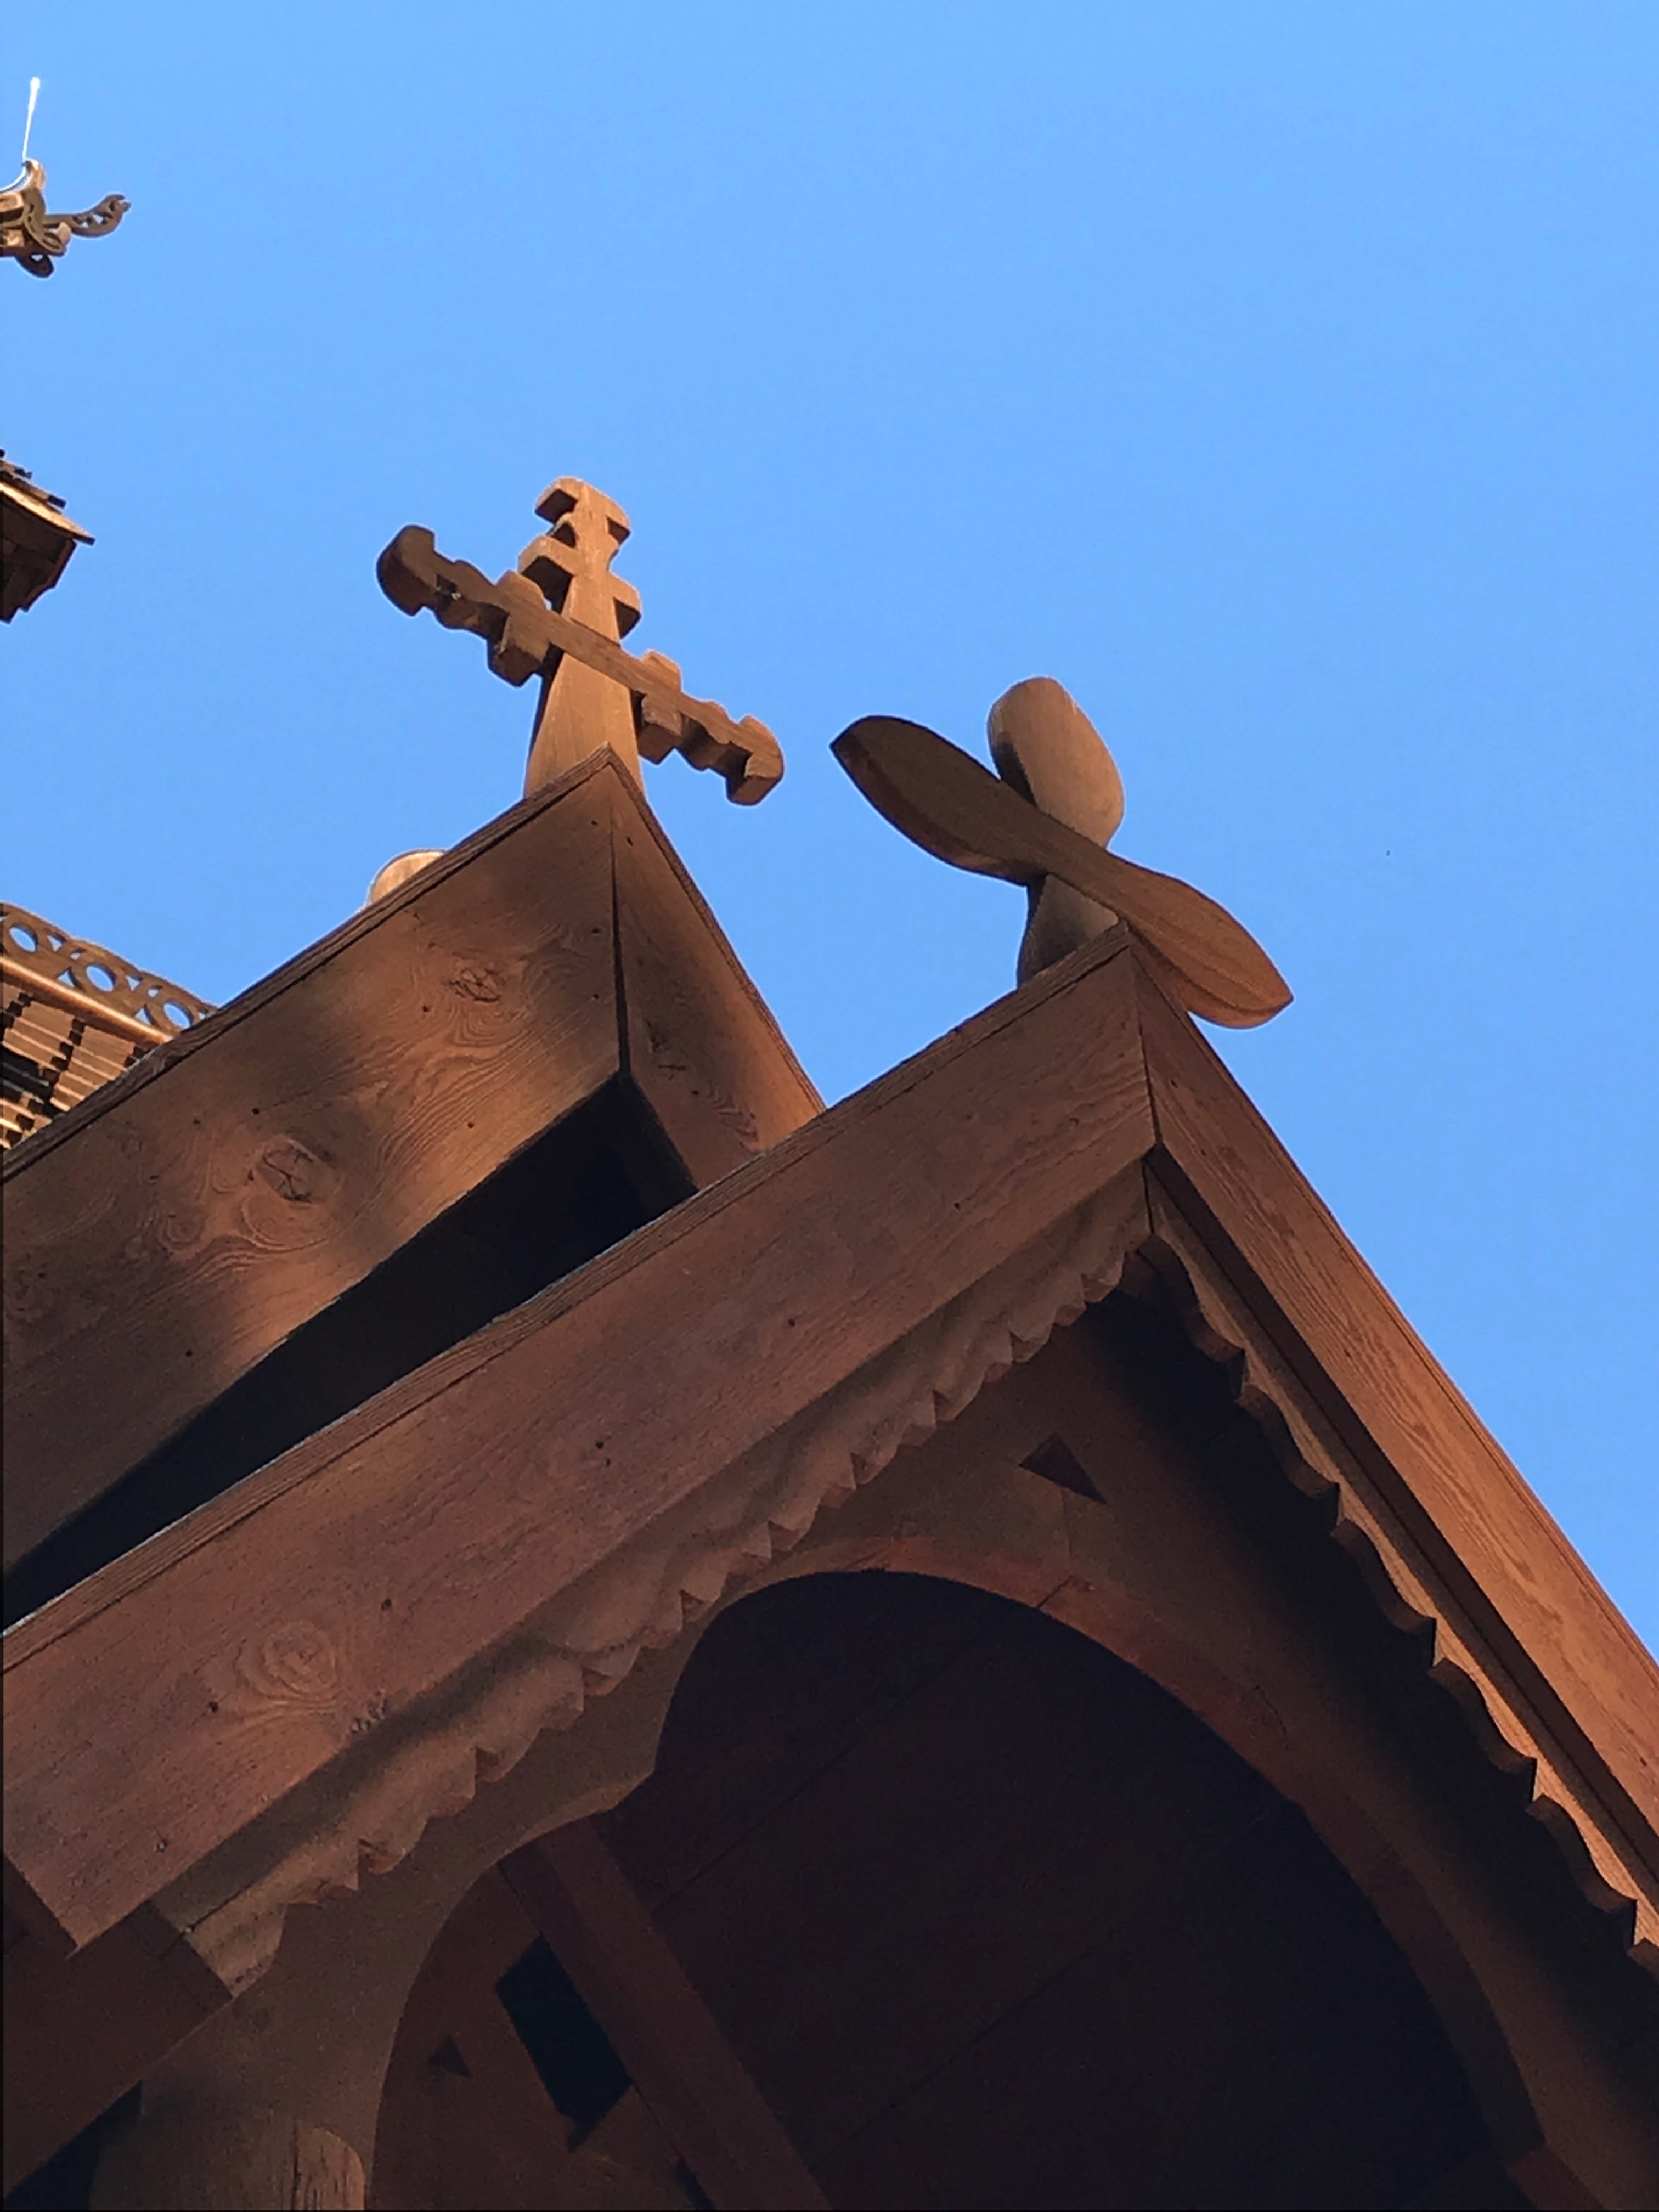 The roof of a wooden church with multiple wooden crosses coming off the top 